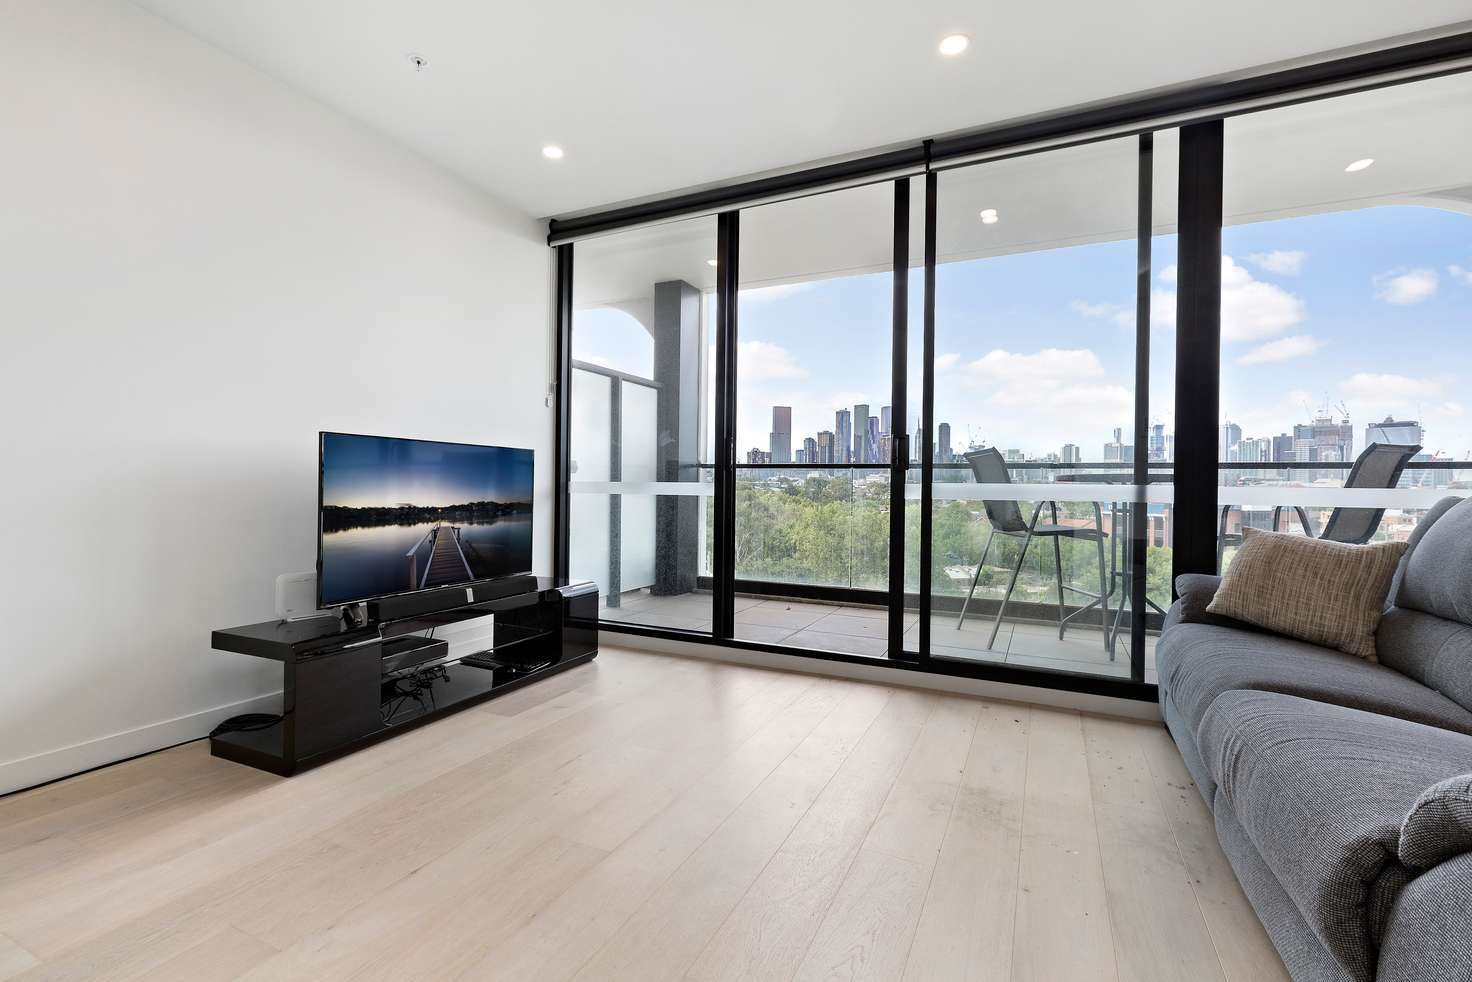 Main view of Homely apartment listing, 902/108 Haines Street, North Melbourne VIC 3051